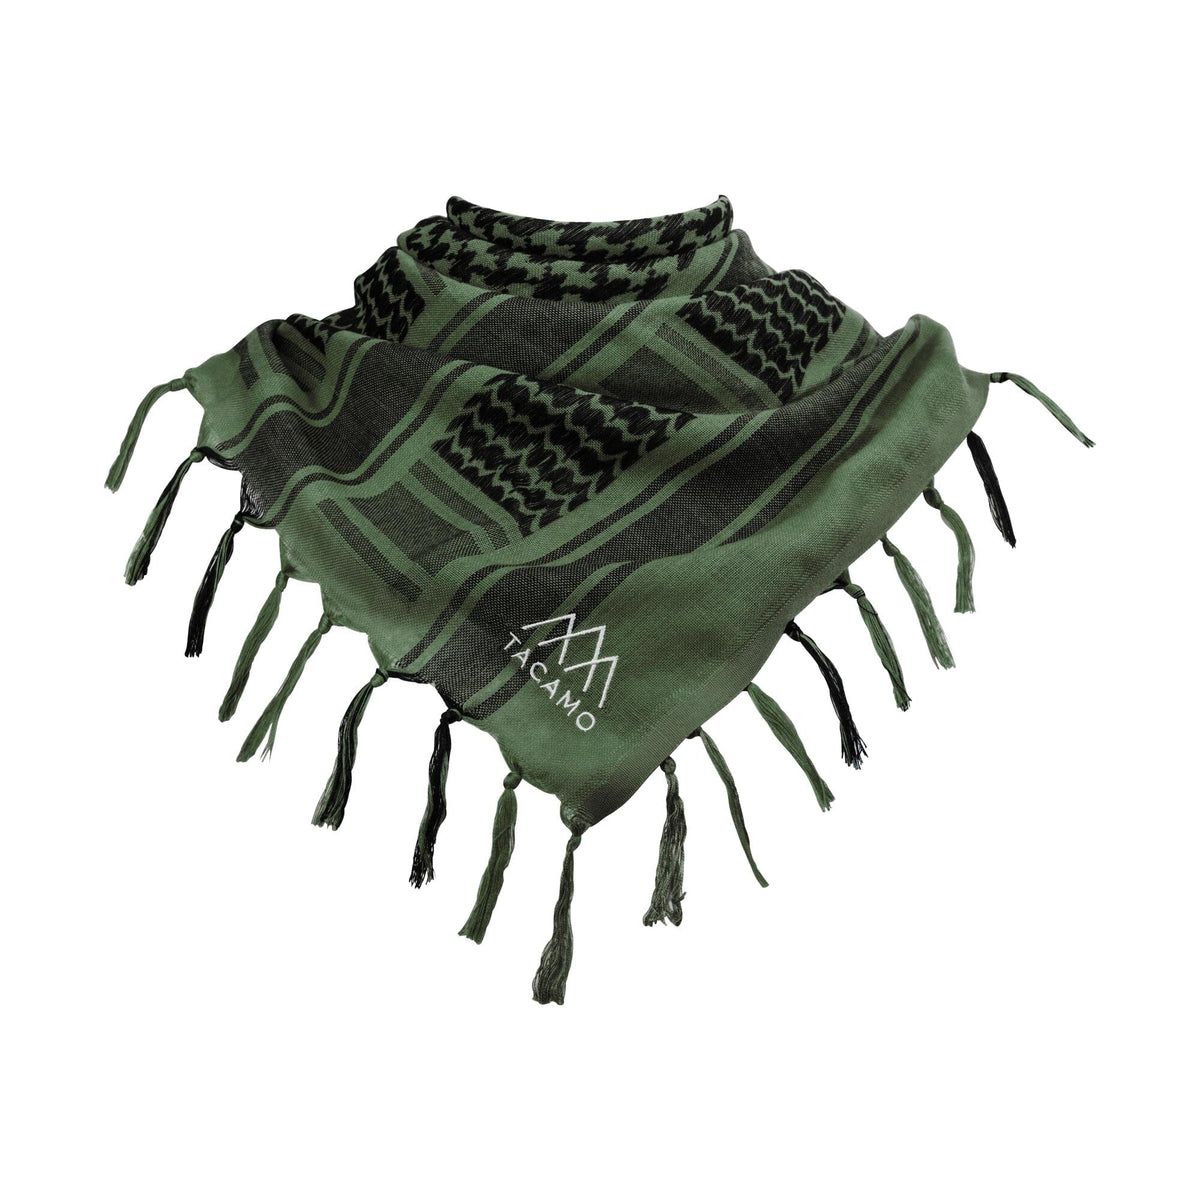 Tactical Shemagh Scarf - Olive Drab